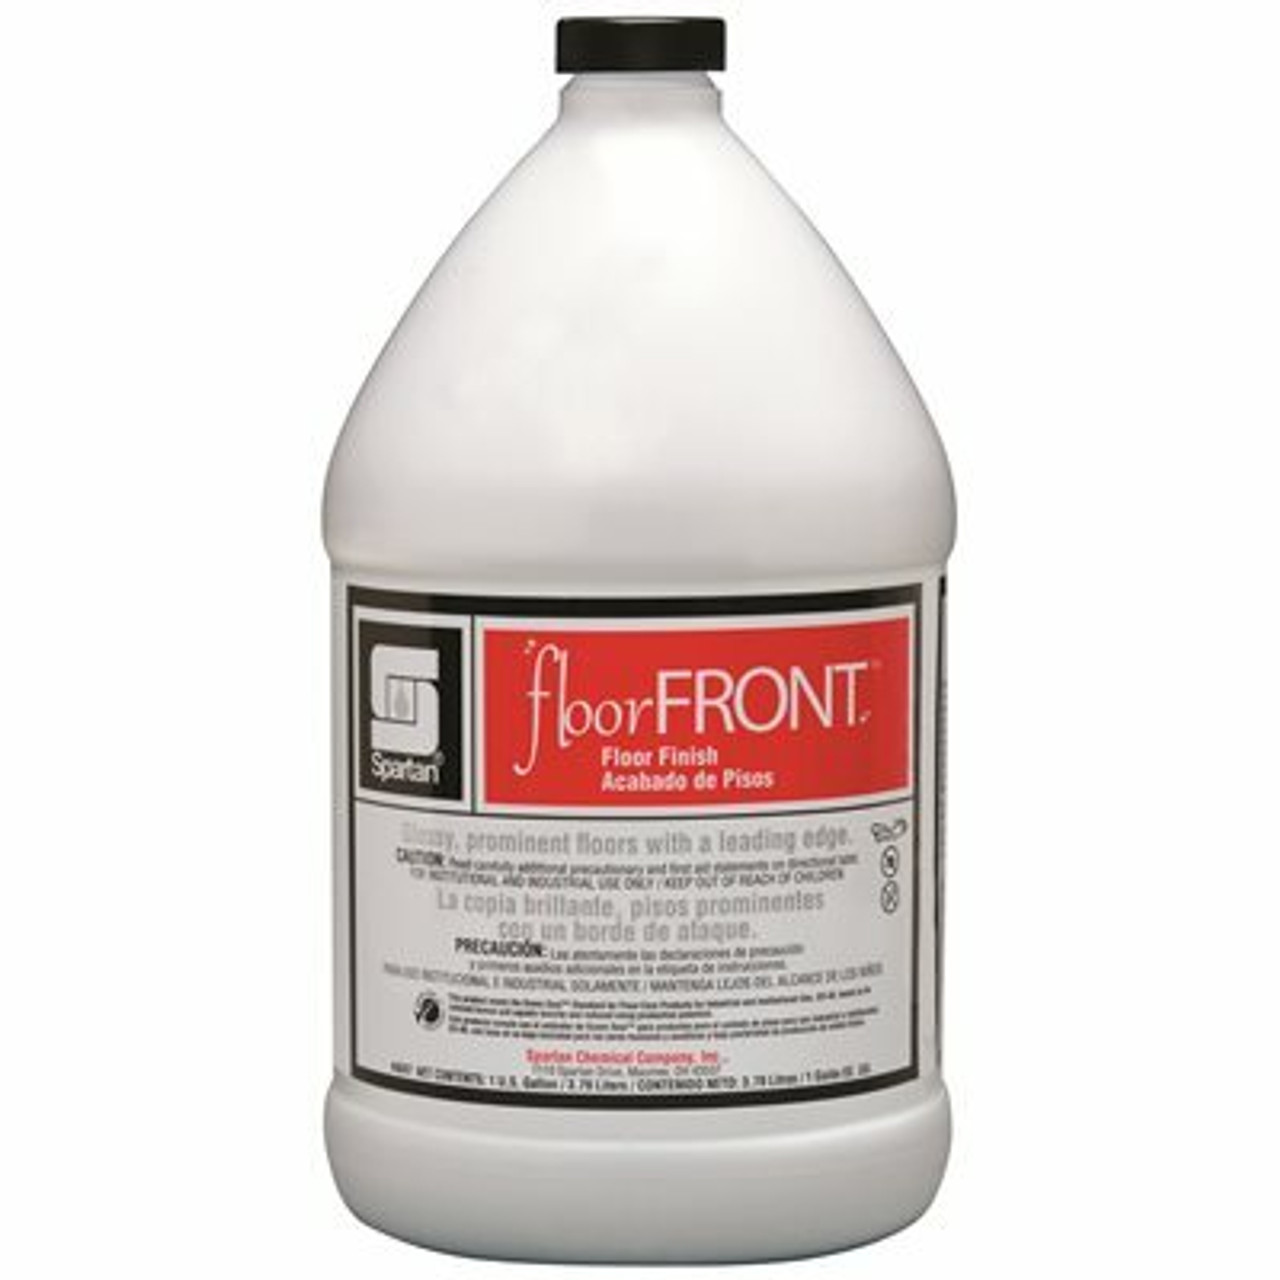 Spartan Chemical Company Floorfront 1 Gallon Floor Finish (4 Per Pack)